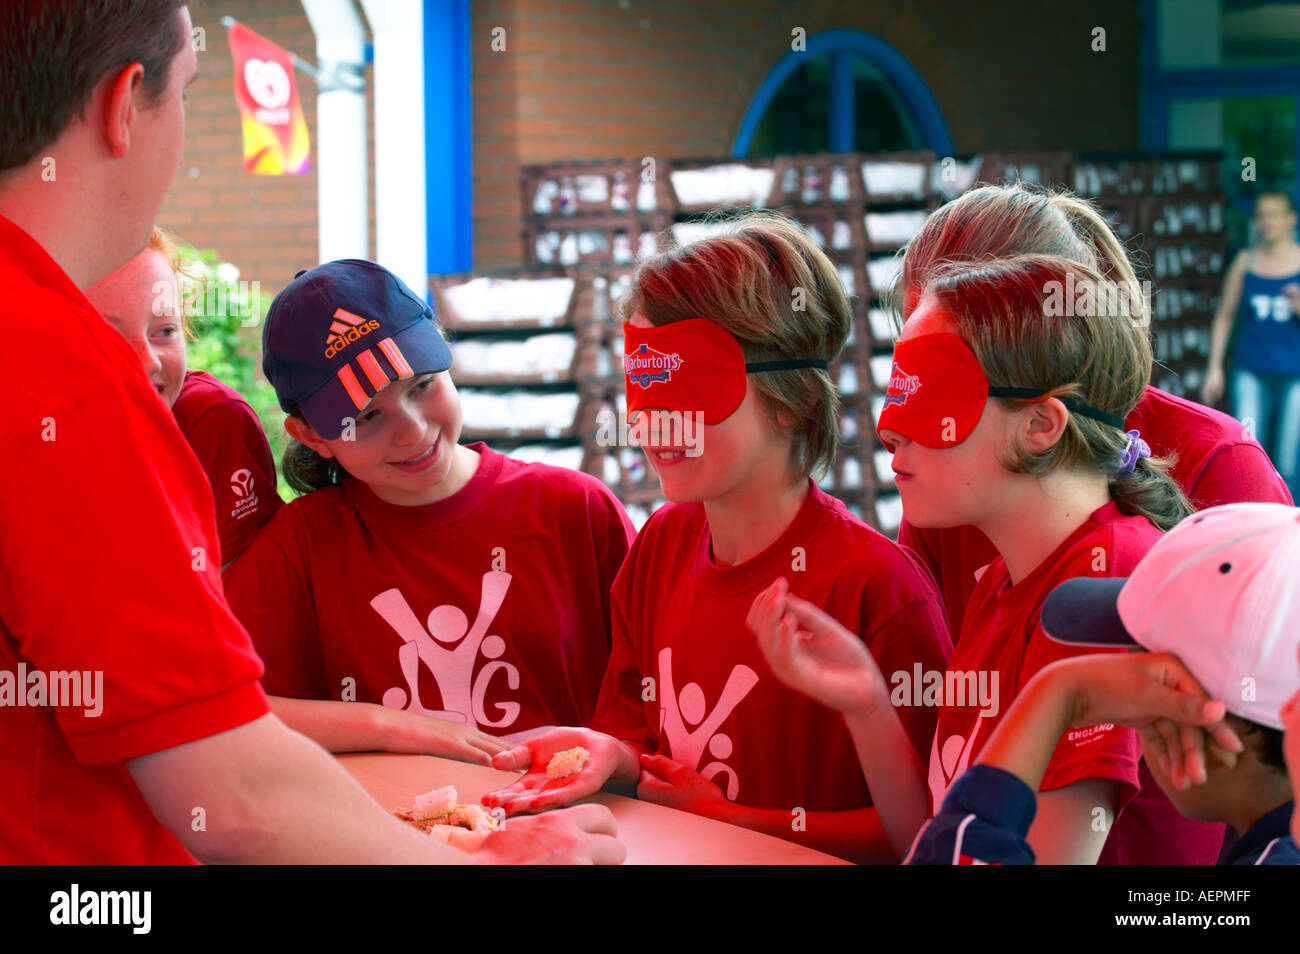 young girls taste testing bread at a sports event Stock Photo